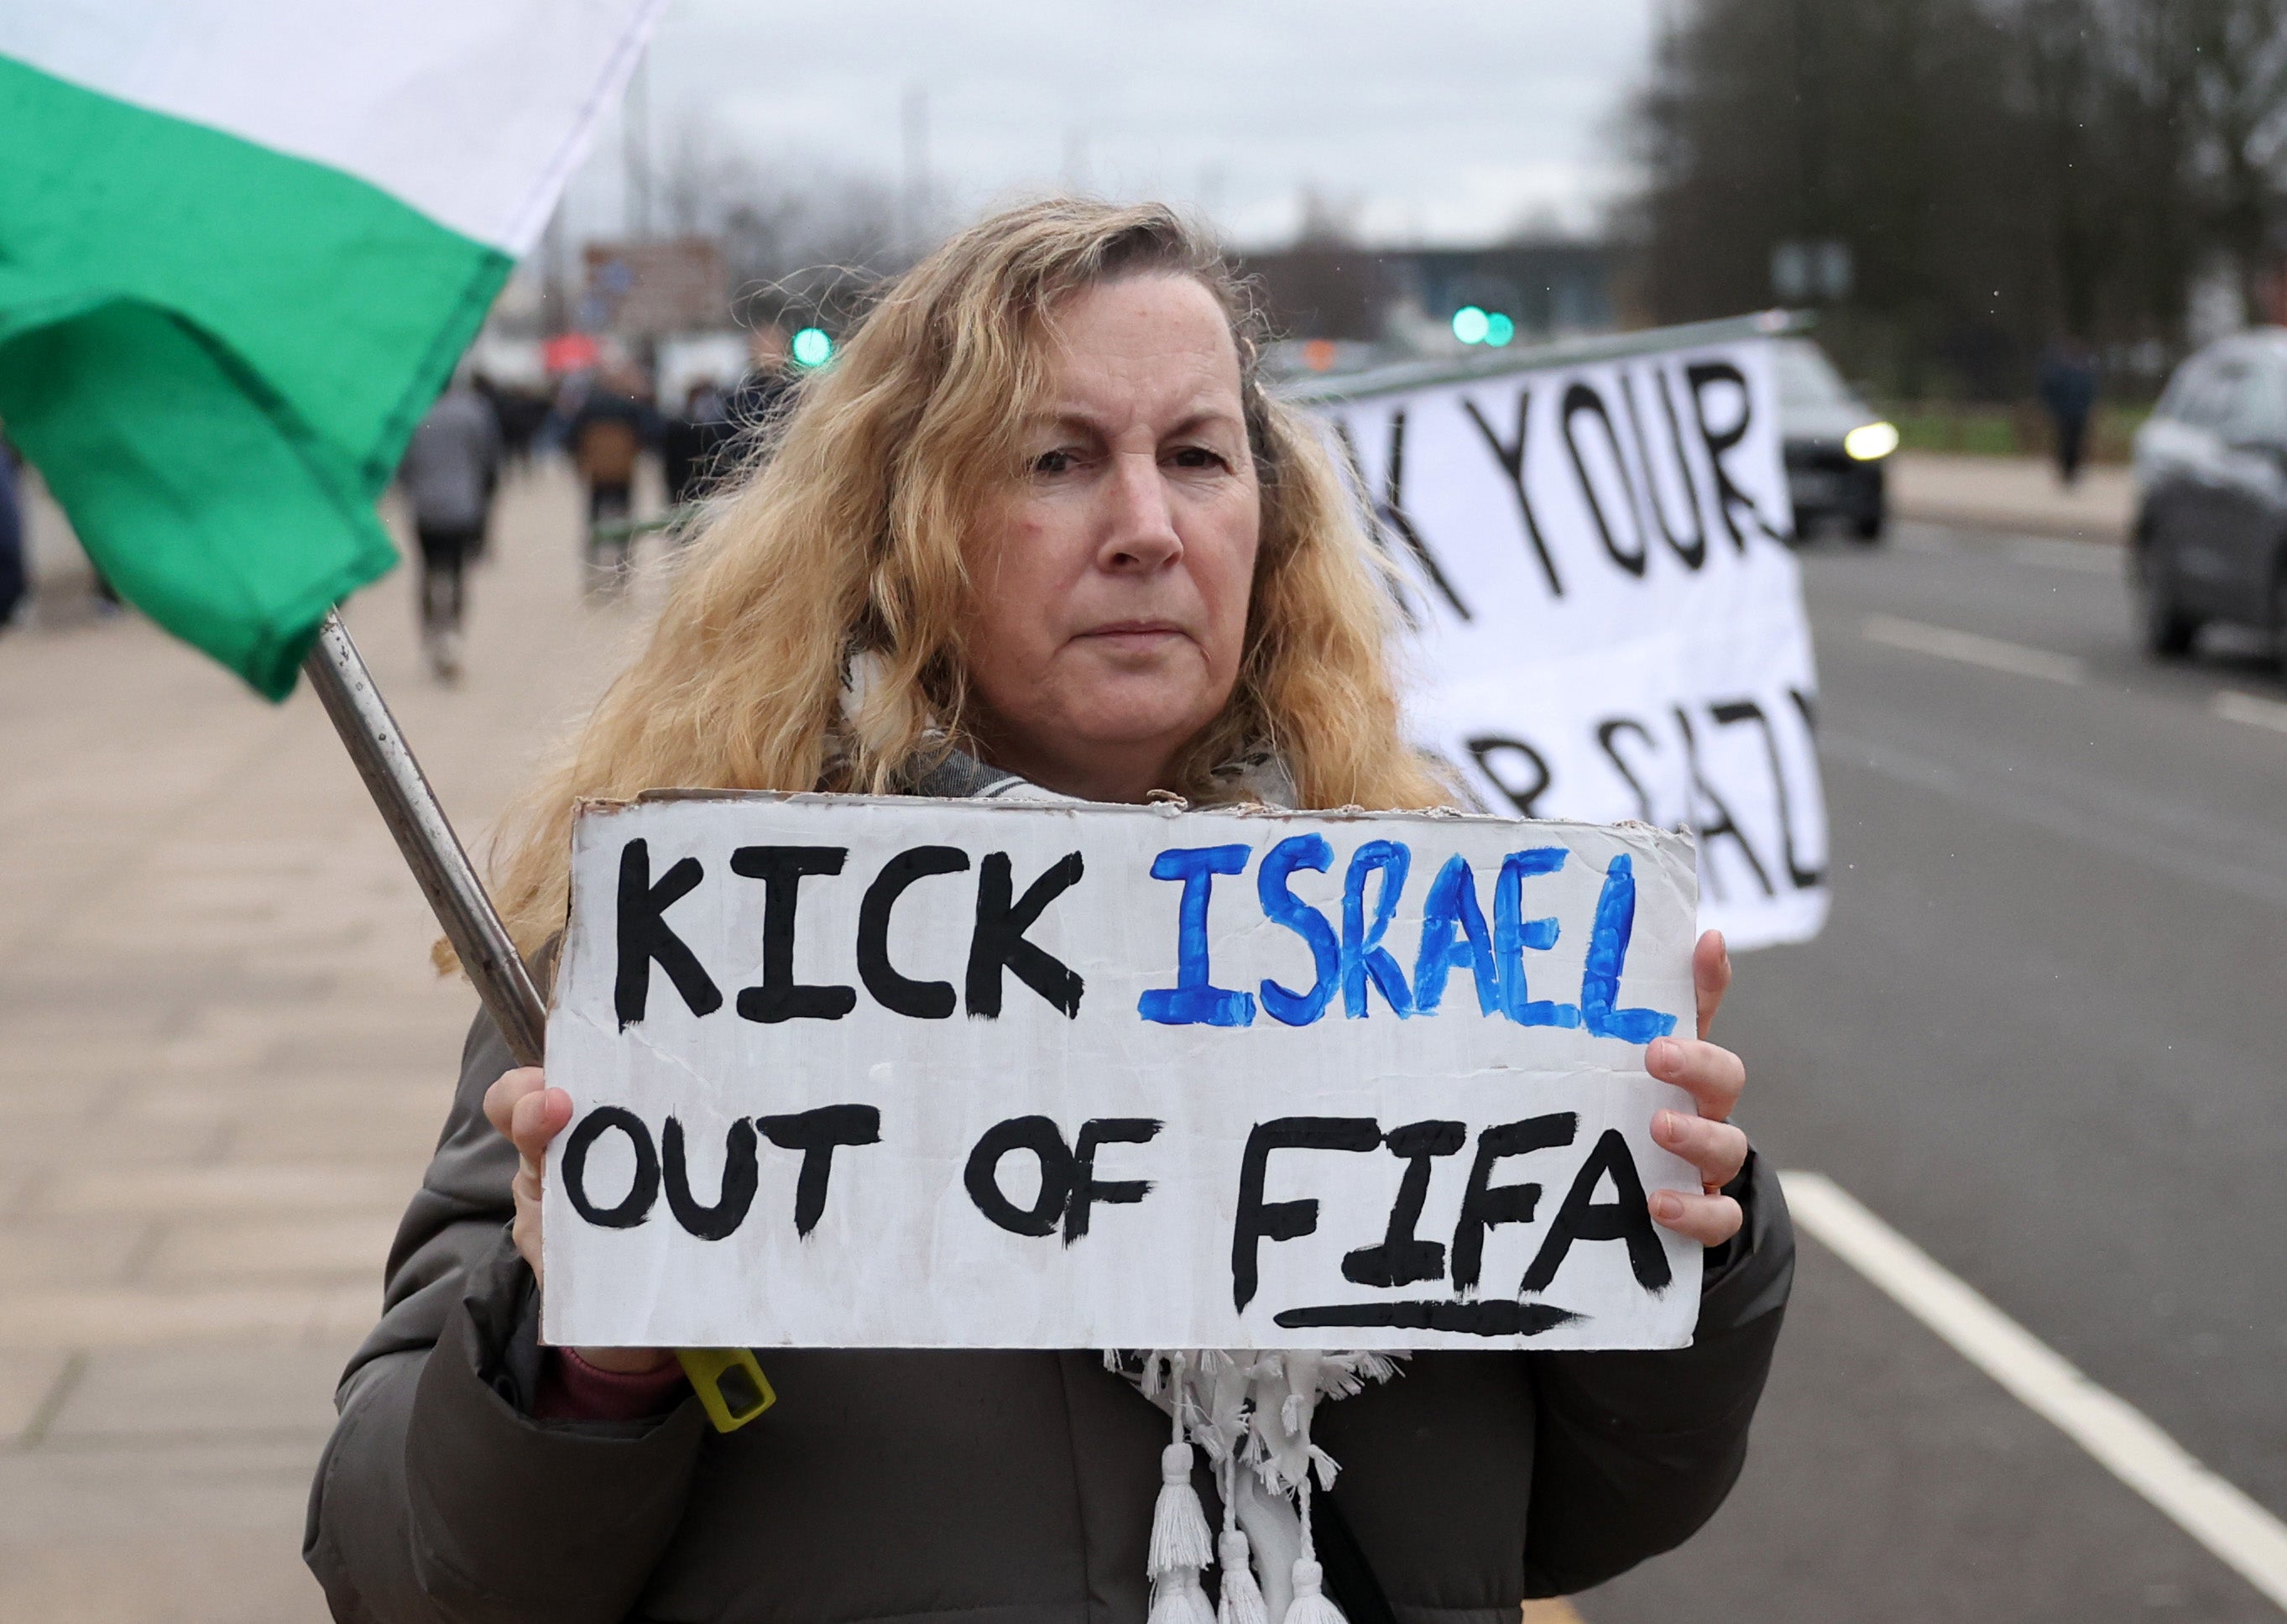 Some protesters around the world have also called for Israel to be expelled from Fifa